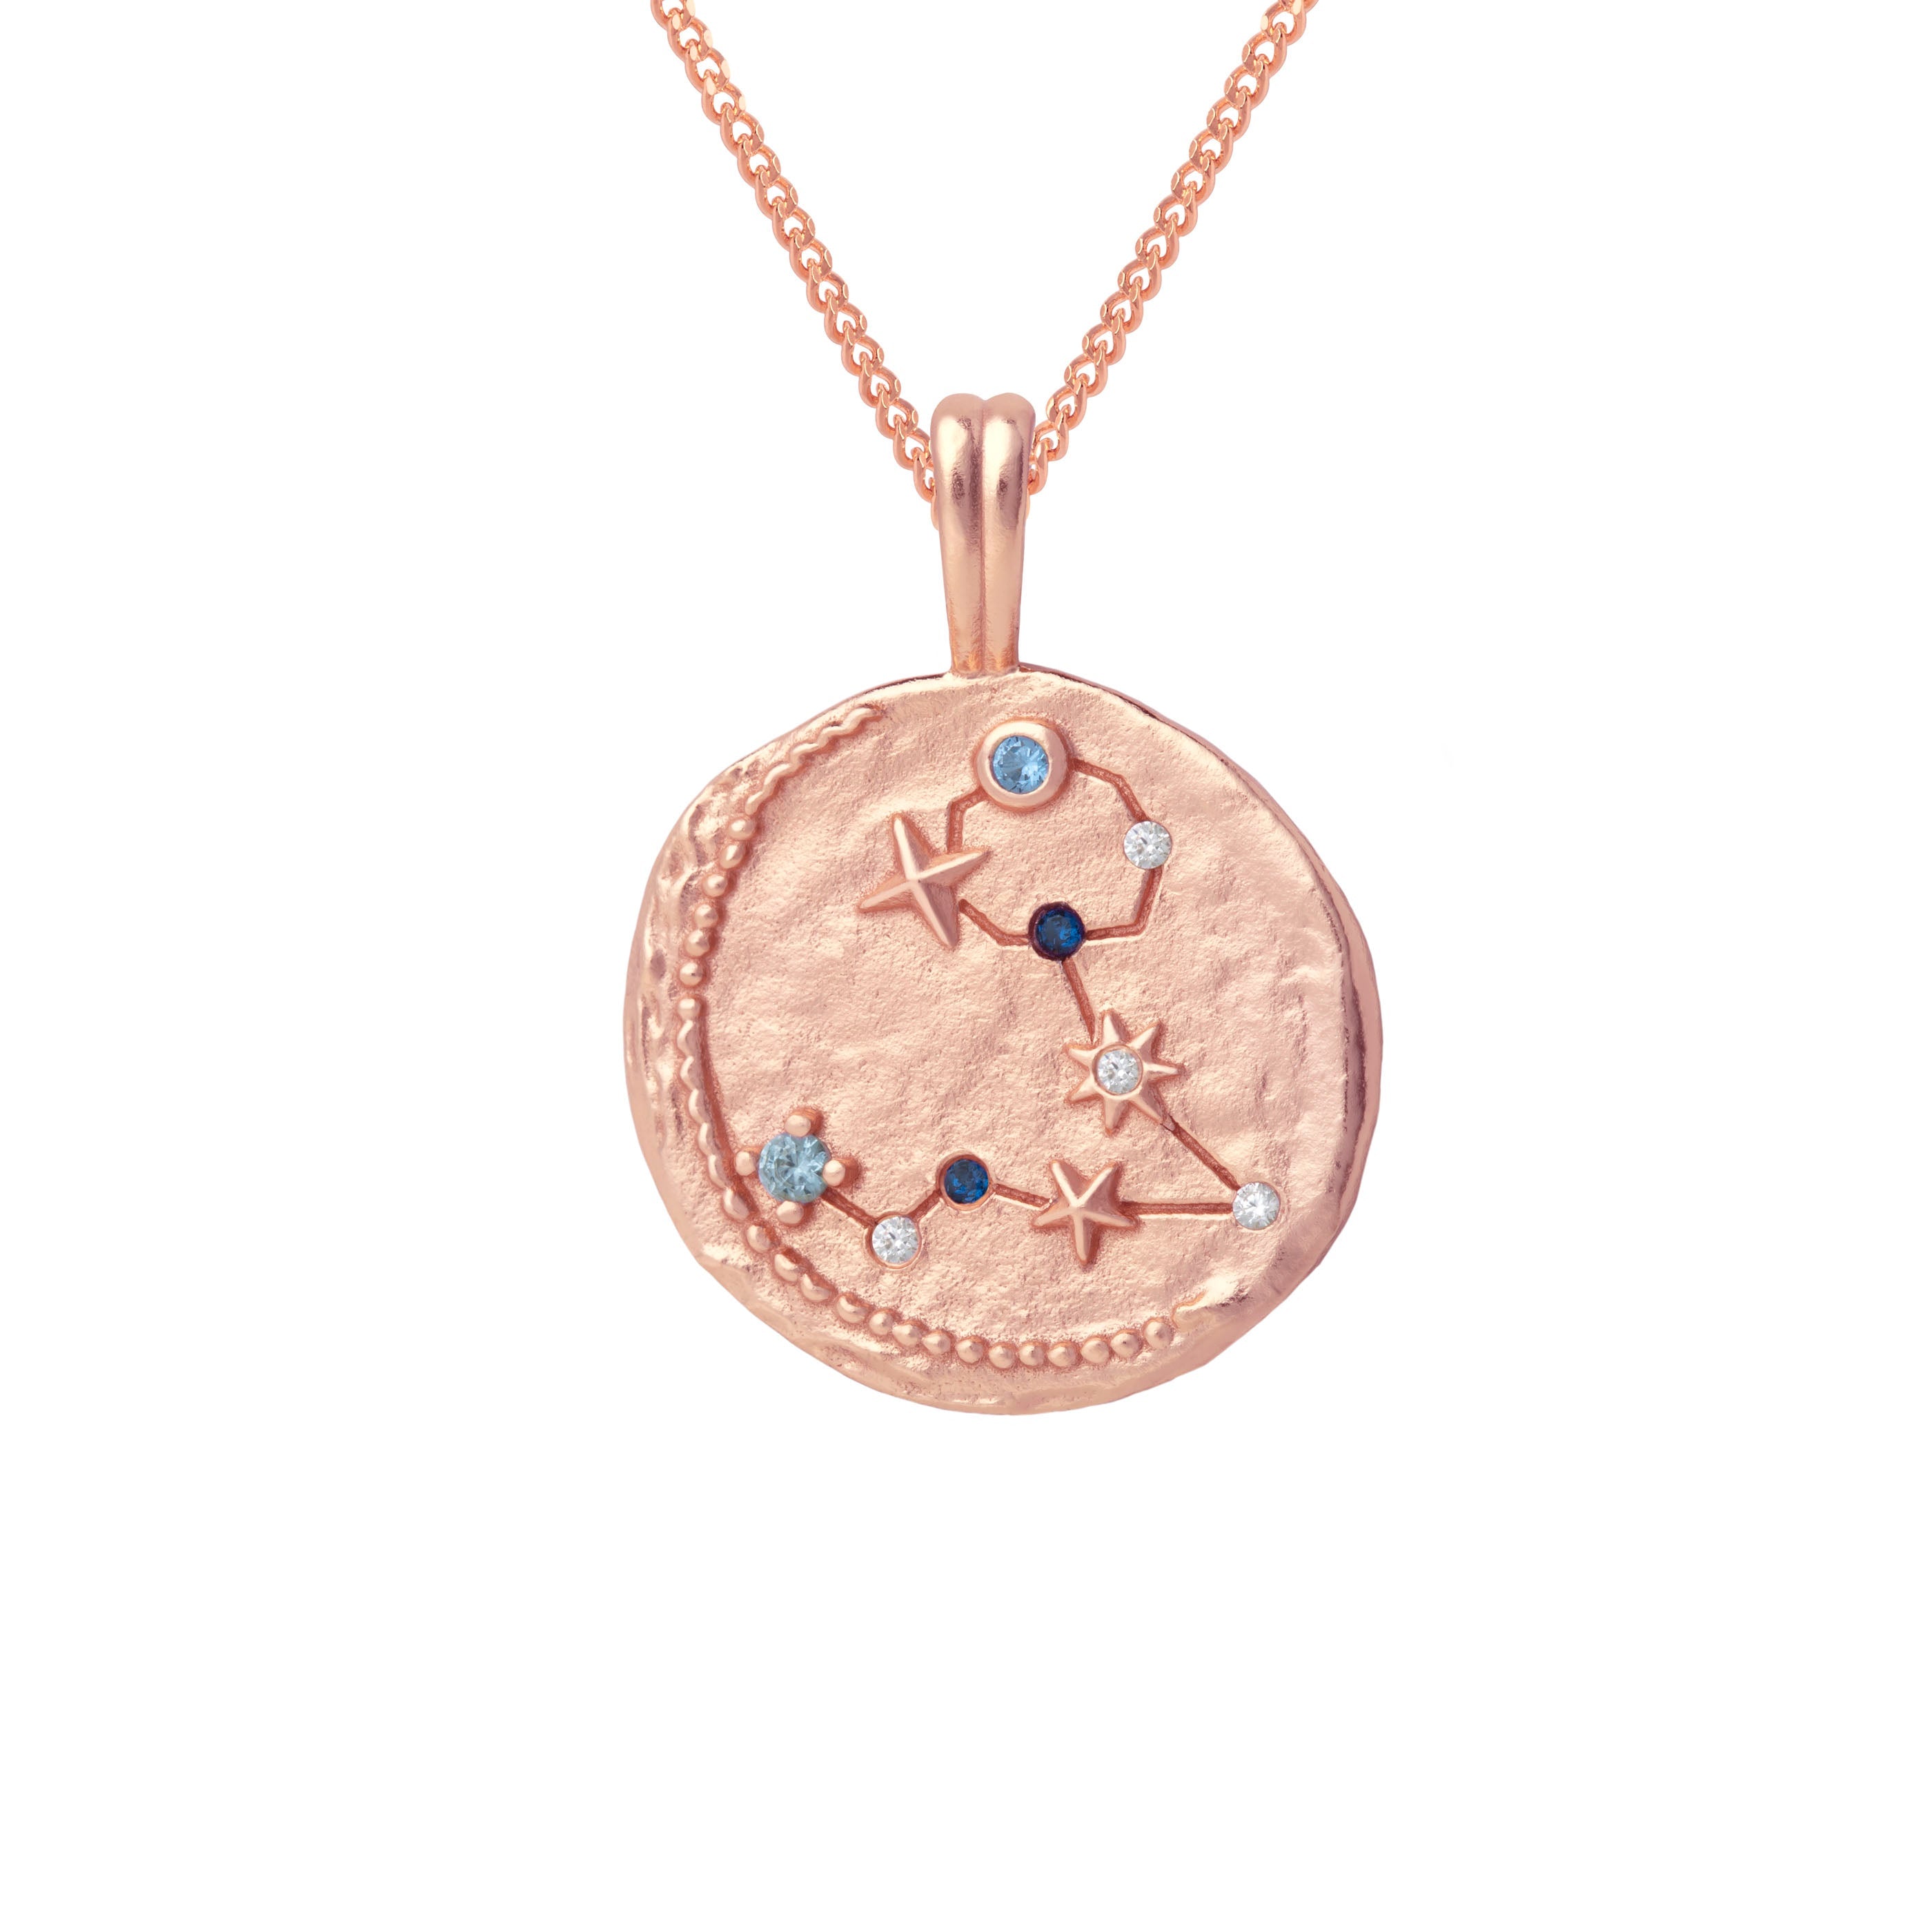 Pisces Zodiac Pendant Necklace in Rose Gold